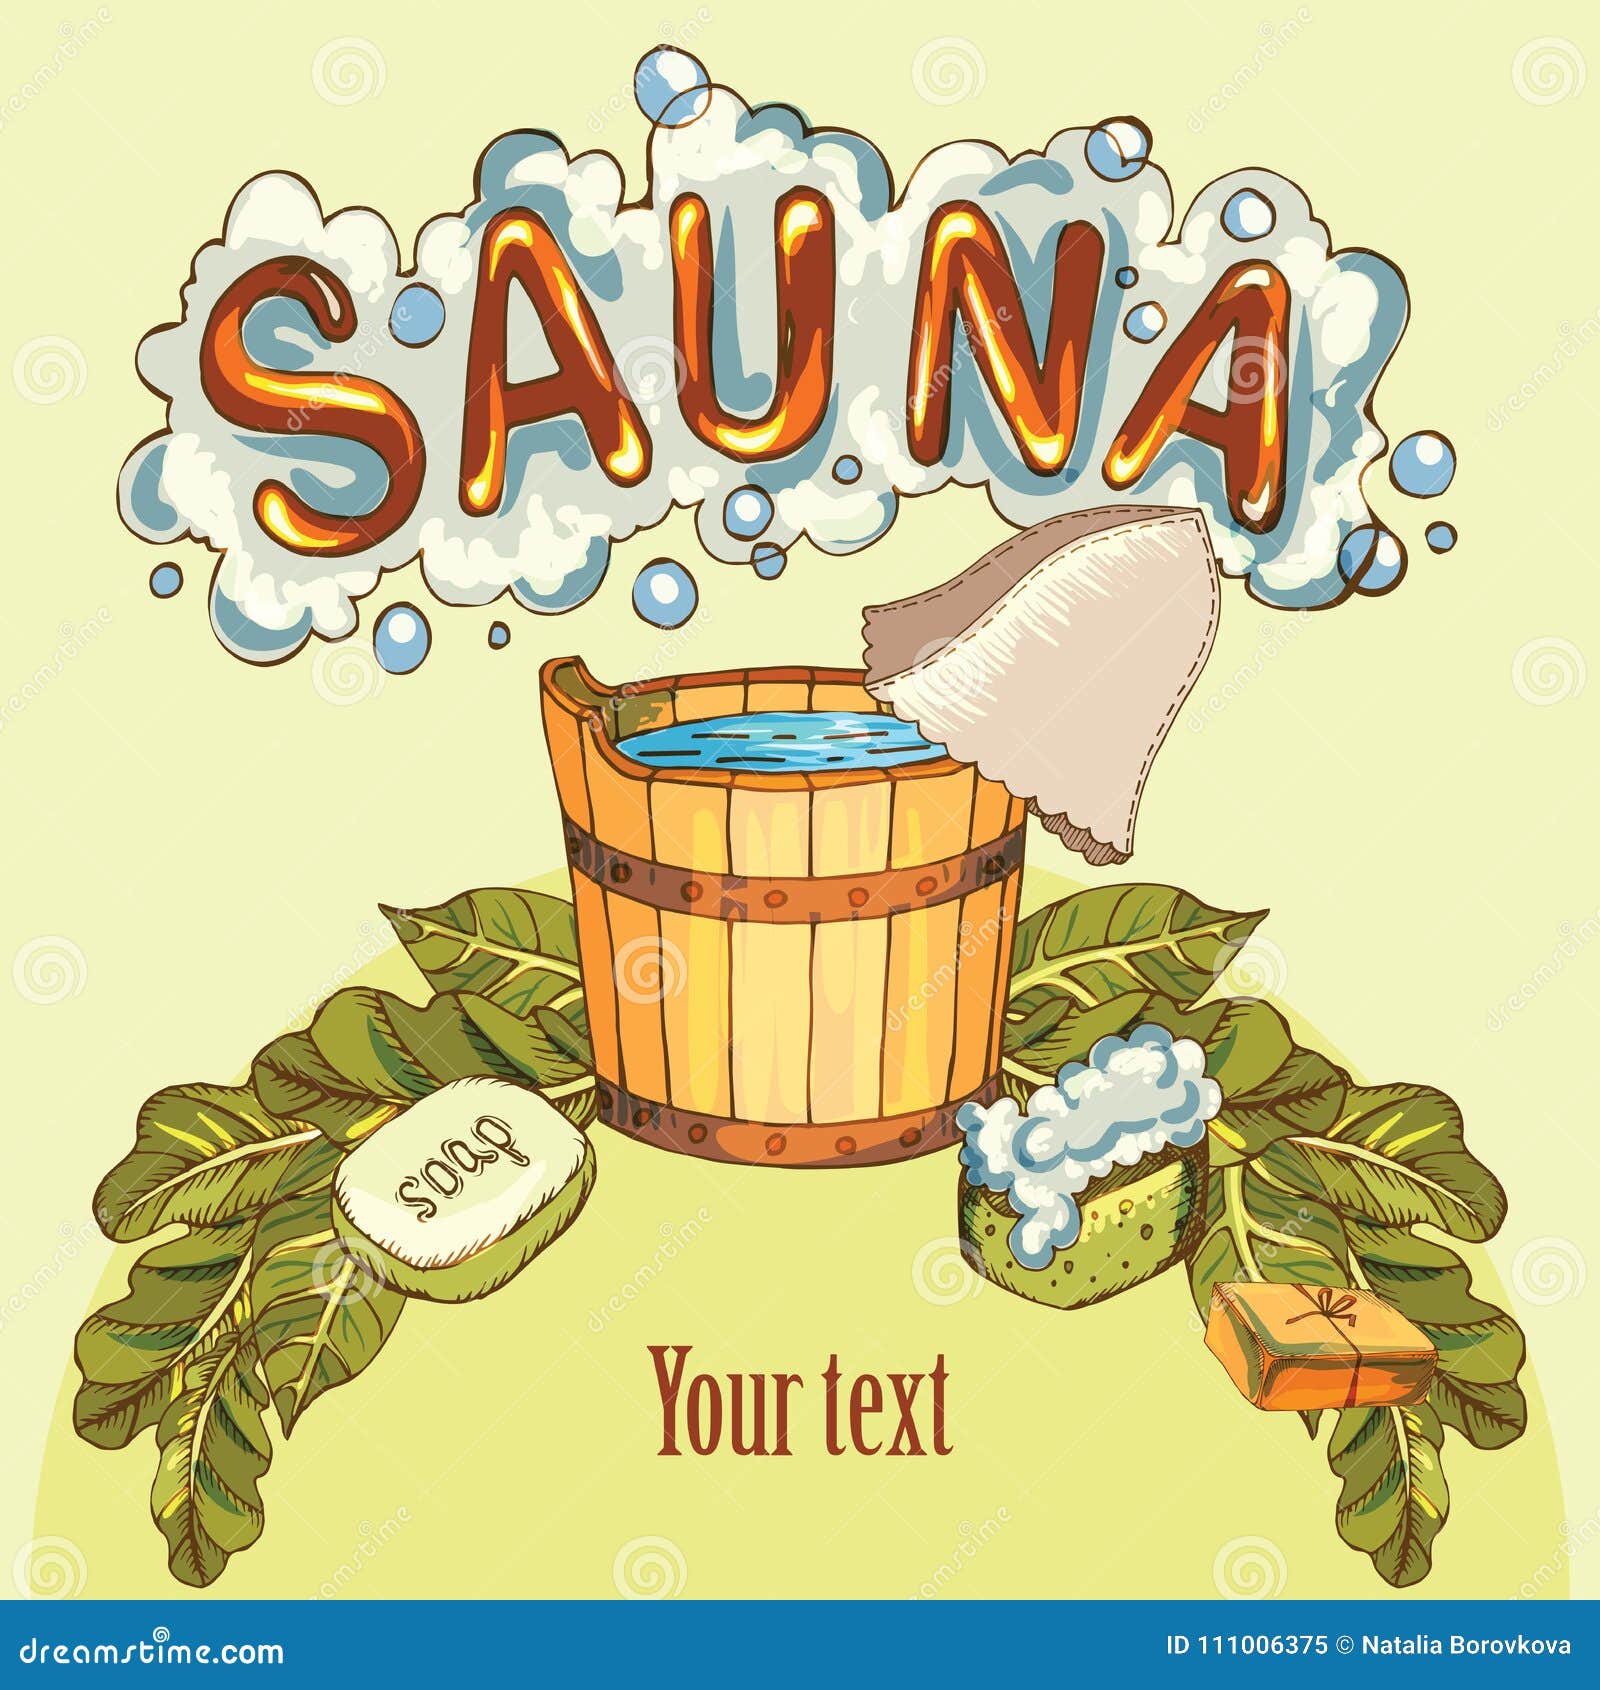 https://thumbs.dreamstime.com/z/vector-background-cartoon-hand-drawn-sauna-objects-broom-towel-hat-wisp-beer-steam-relaxation-health-care-treatment-111006375.jpg